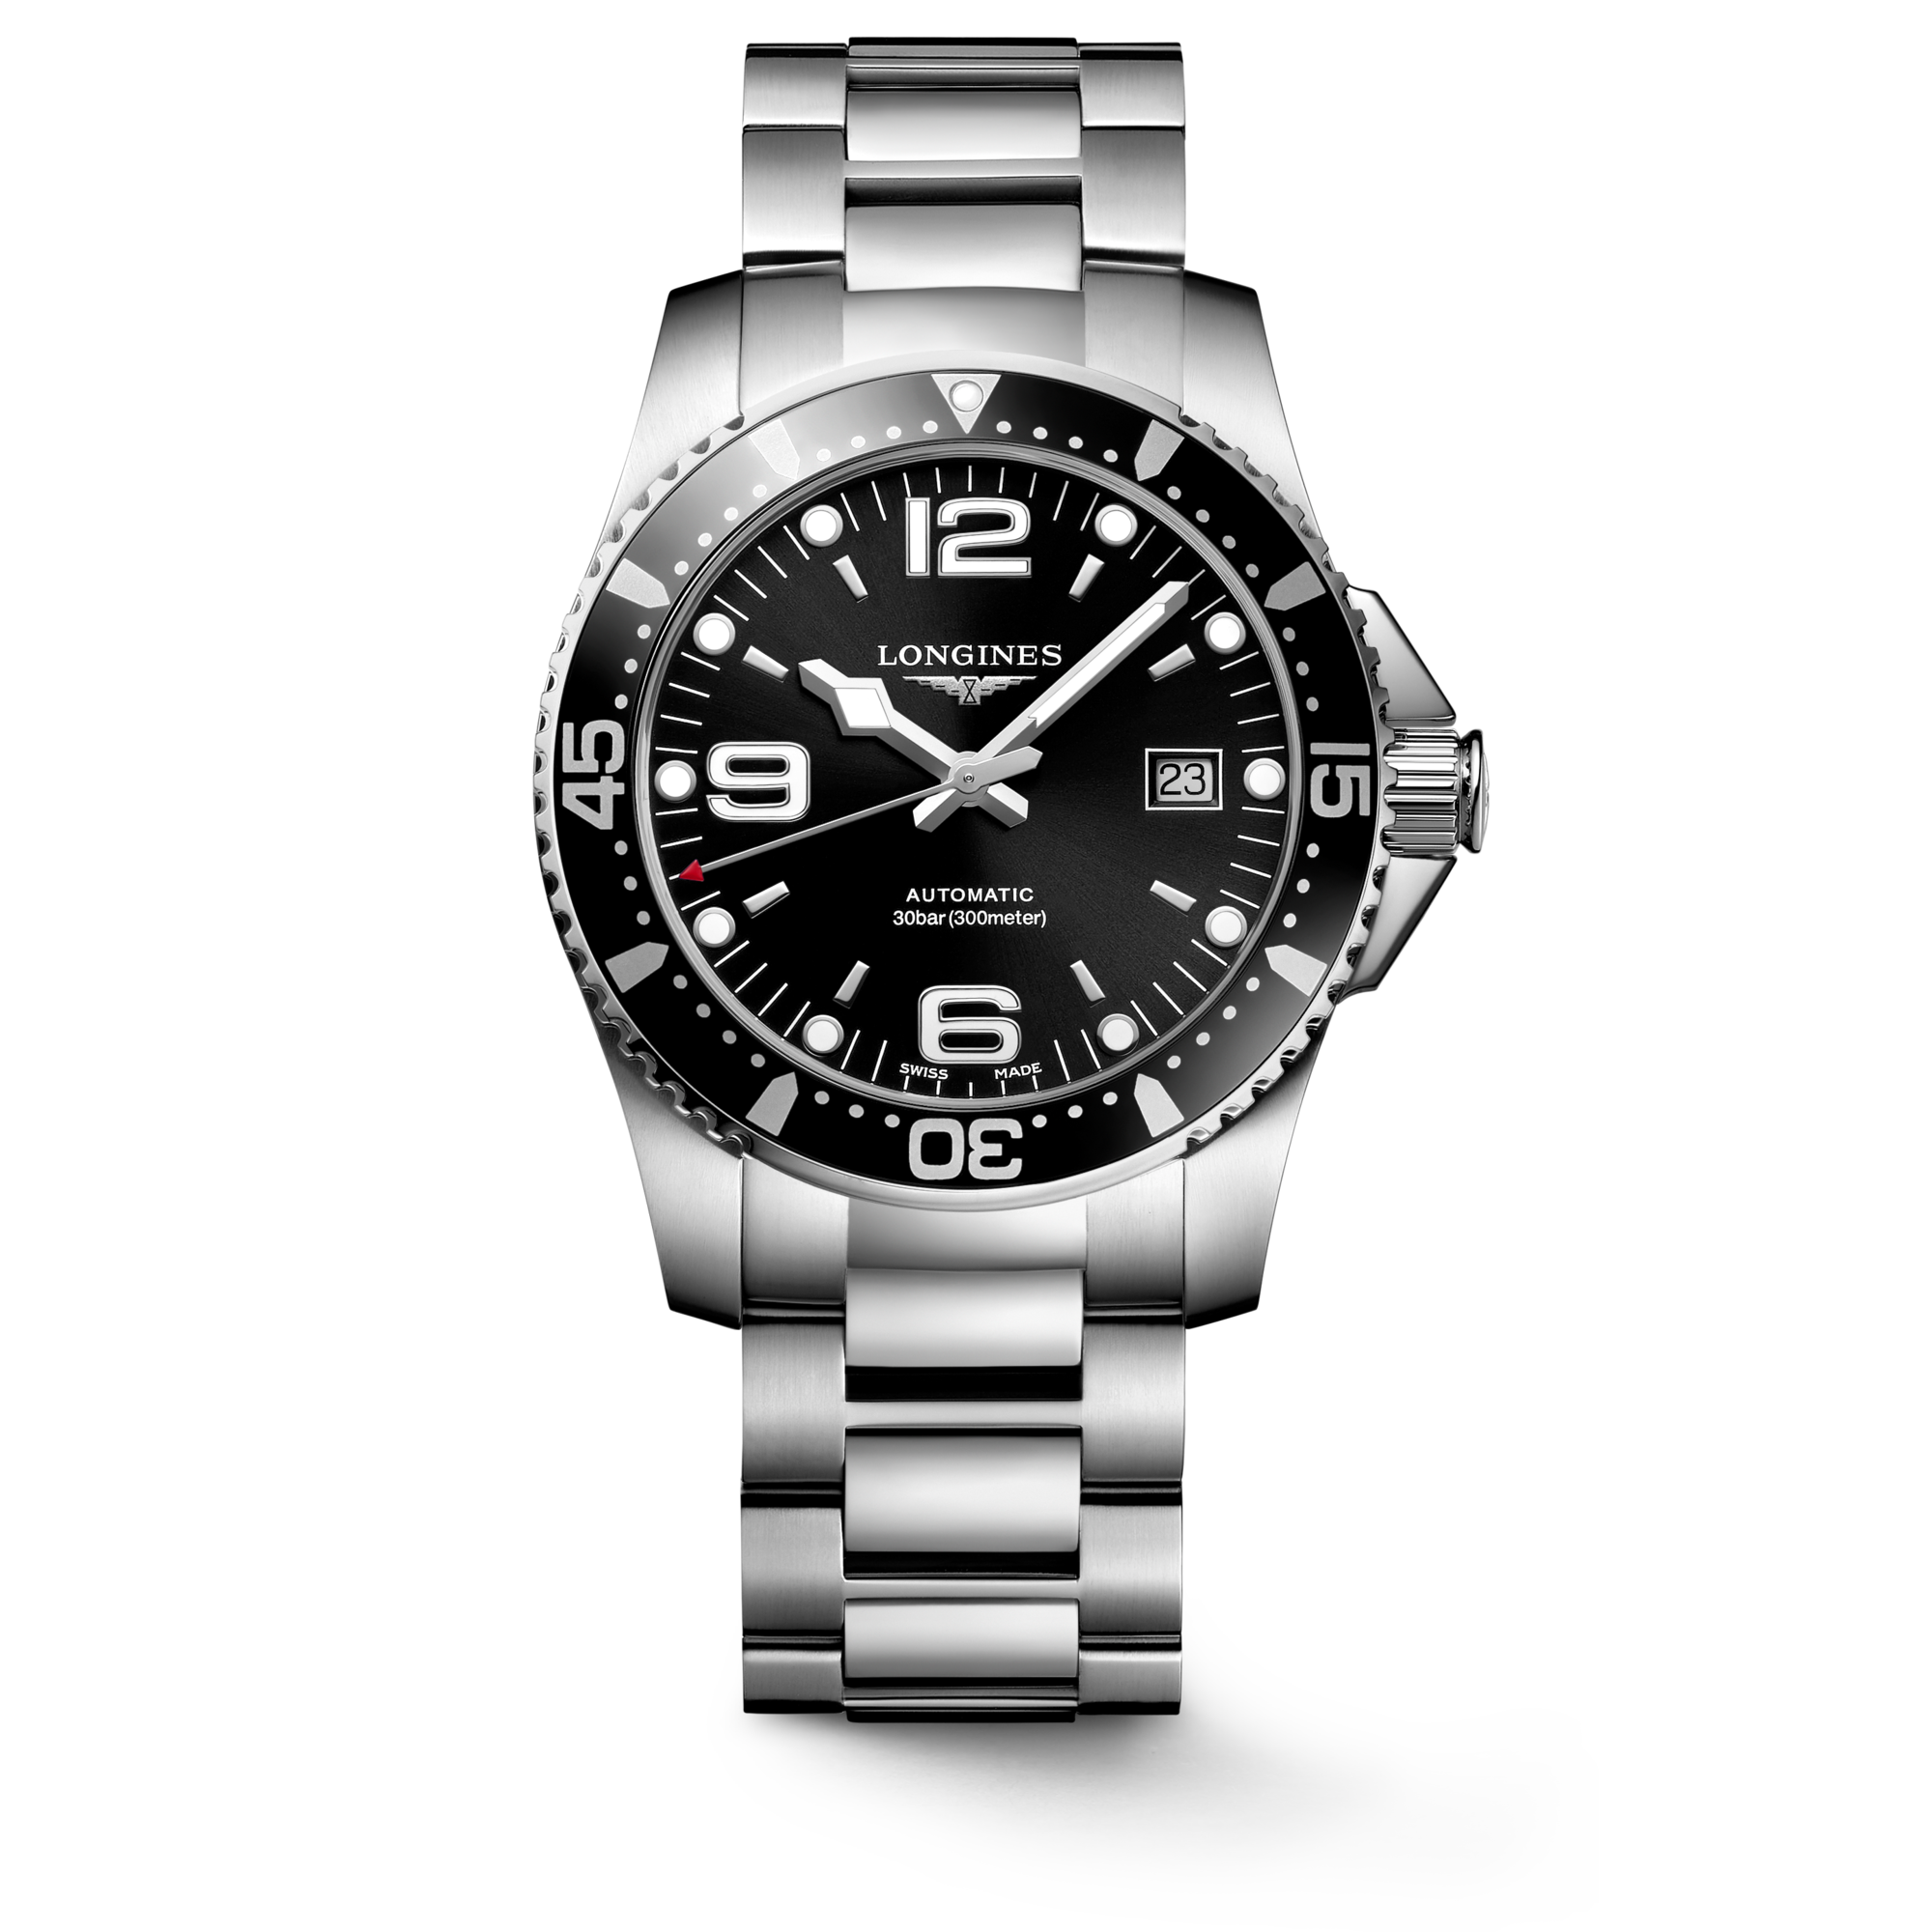 HYDROCONQUEST Automatic, Stainless Steel, Sunray Black Dial, Bracelet Watch